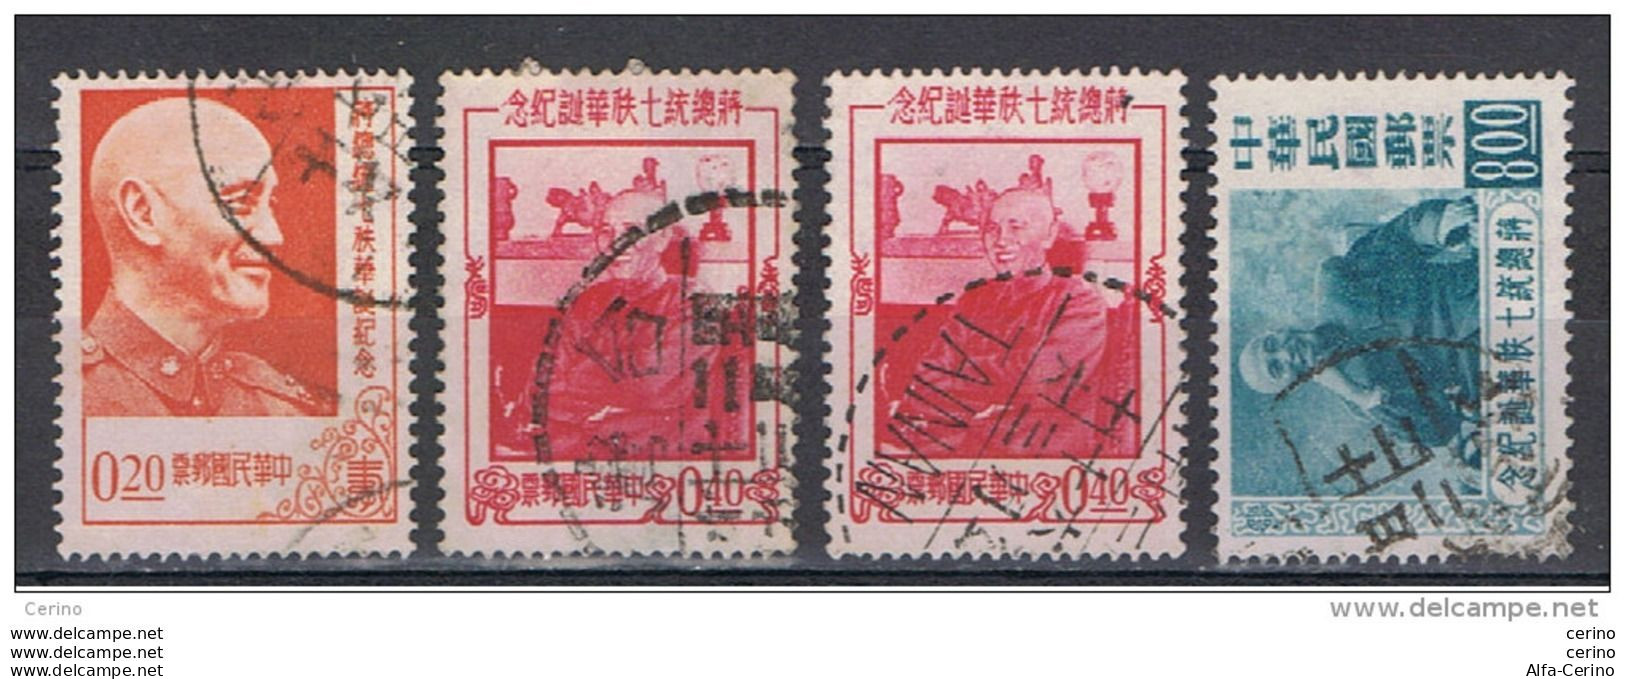 TAIWAN:  1956  ANNIVERSARY  -  4  USED  STAMPS  -  YV/TELL. 213//218 - Used Stamps